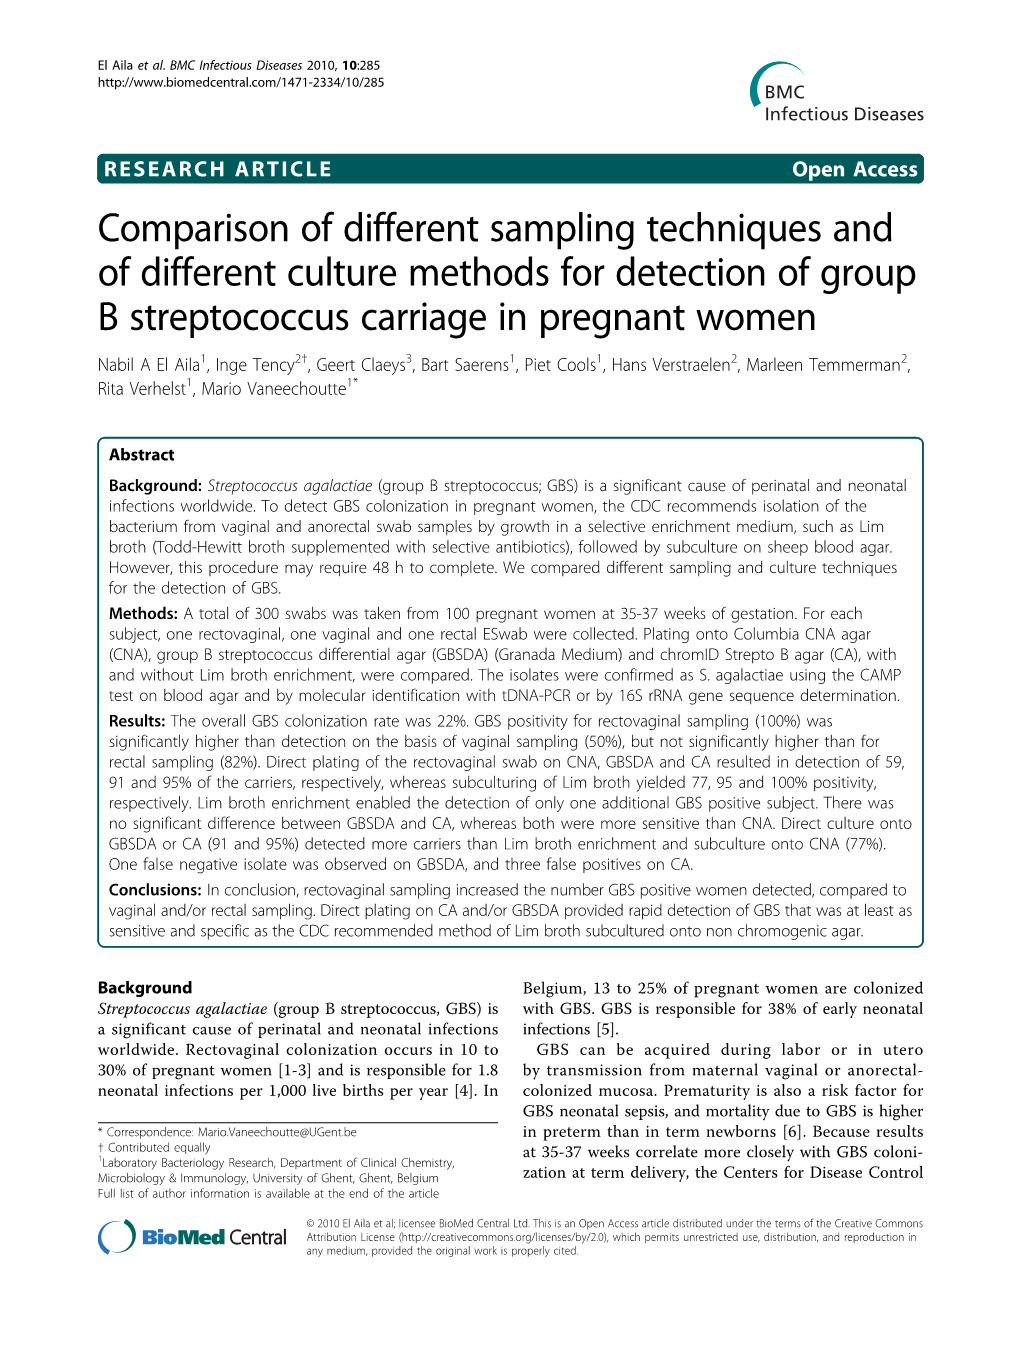 Comparison of Different Sampling Techniques and of Different Culture Methods for Detection of Group B Streptococcus Carriage in Pregnant Women